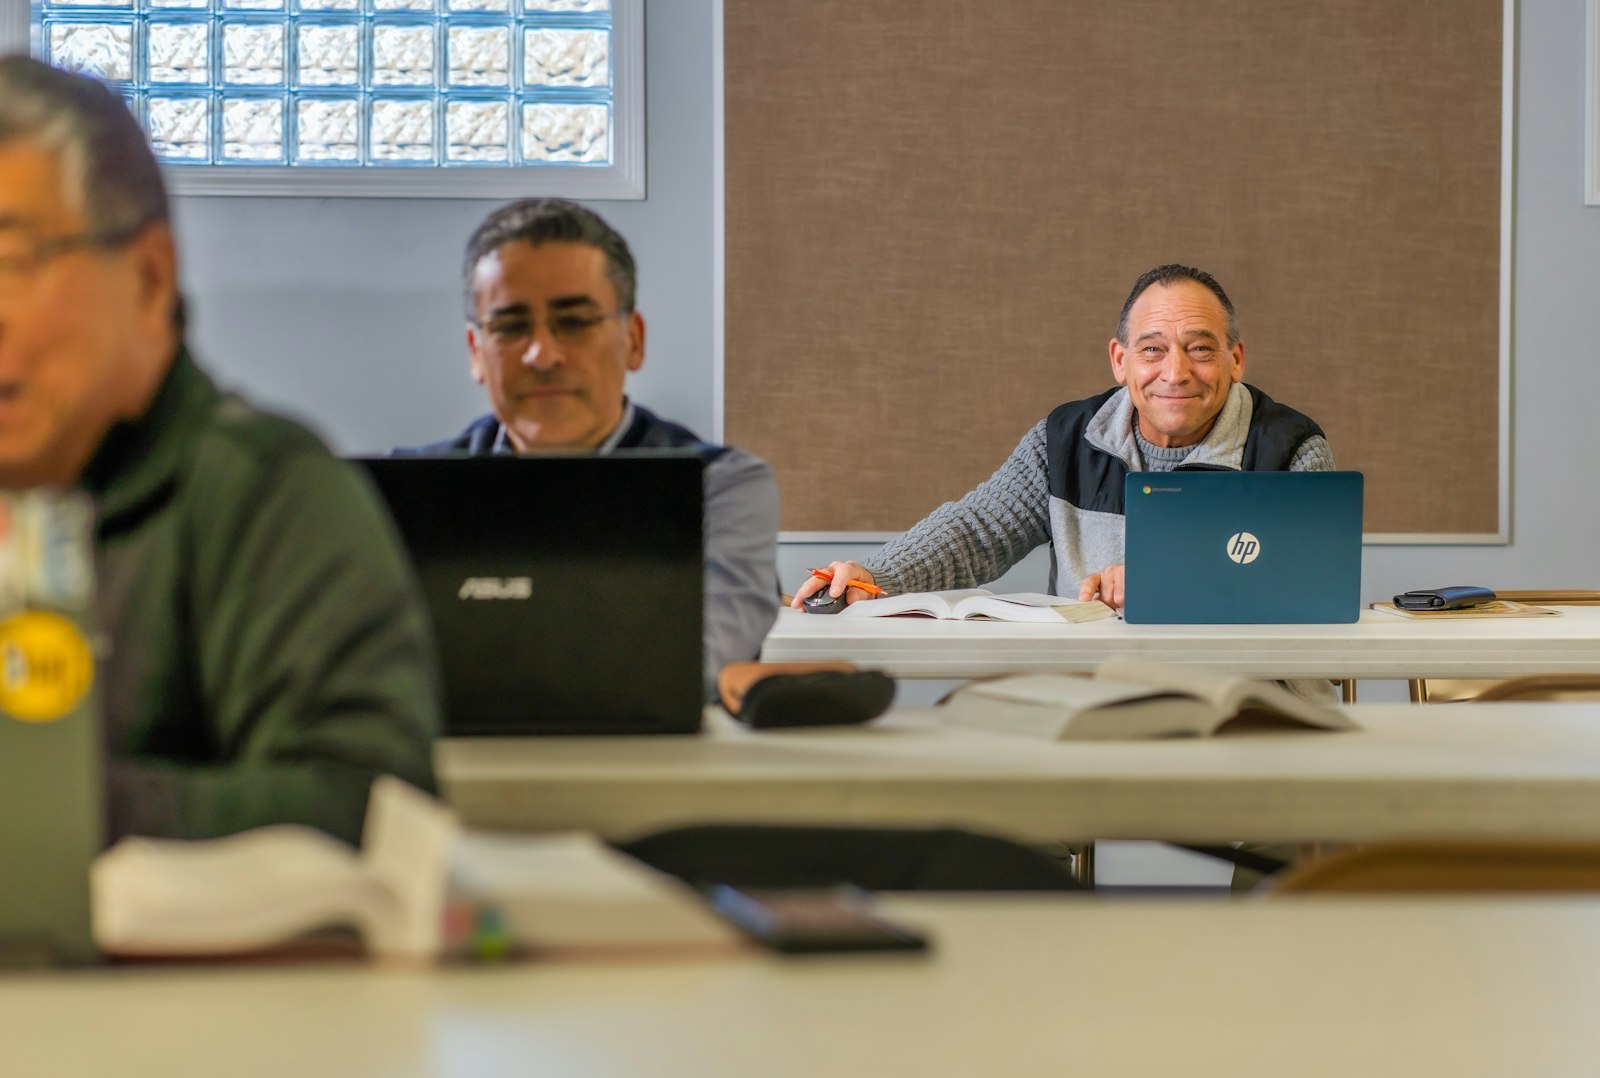 The seminary has made three-year commitments to stay in each parish and will offer six courses, one per semester, for students to achieve their Certificate in the Catholic Theology.